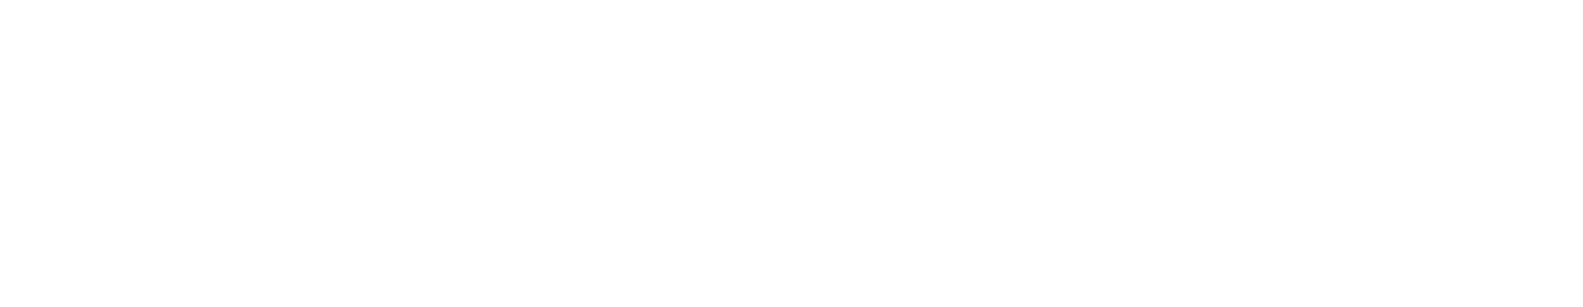 JOINT-DEFENSE ADVANCED MANUFACTURING MEETING FOR INNOVATION AND TRANSITION